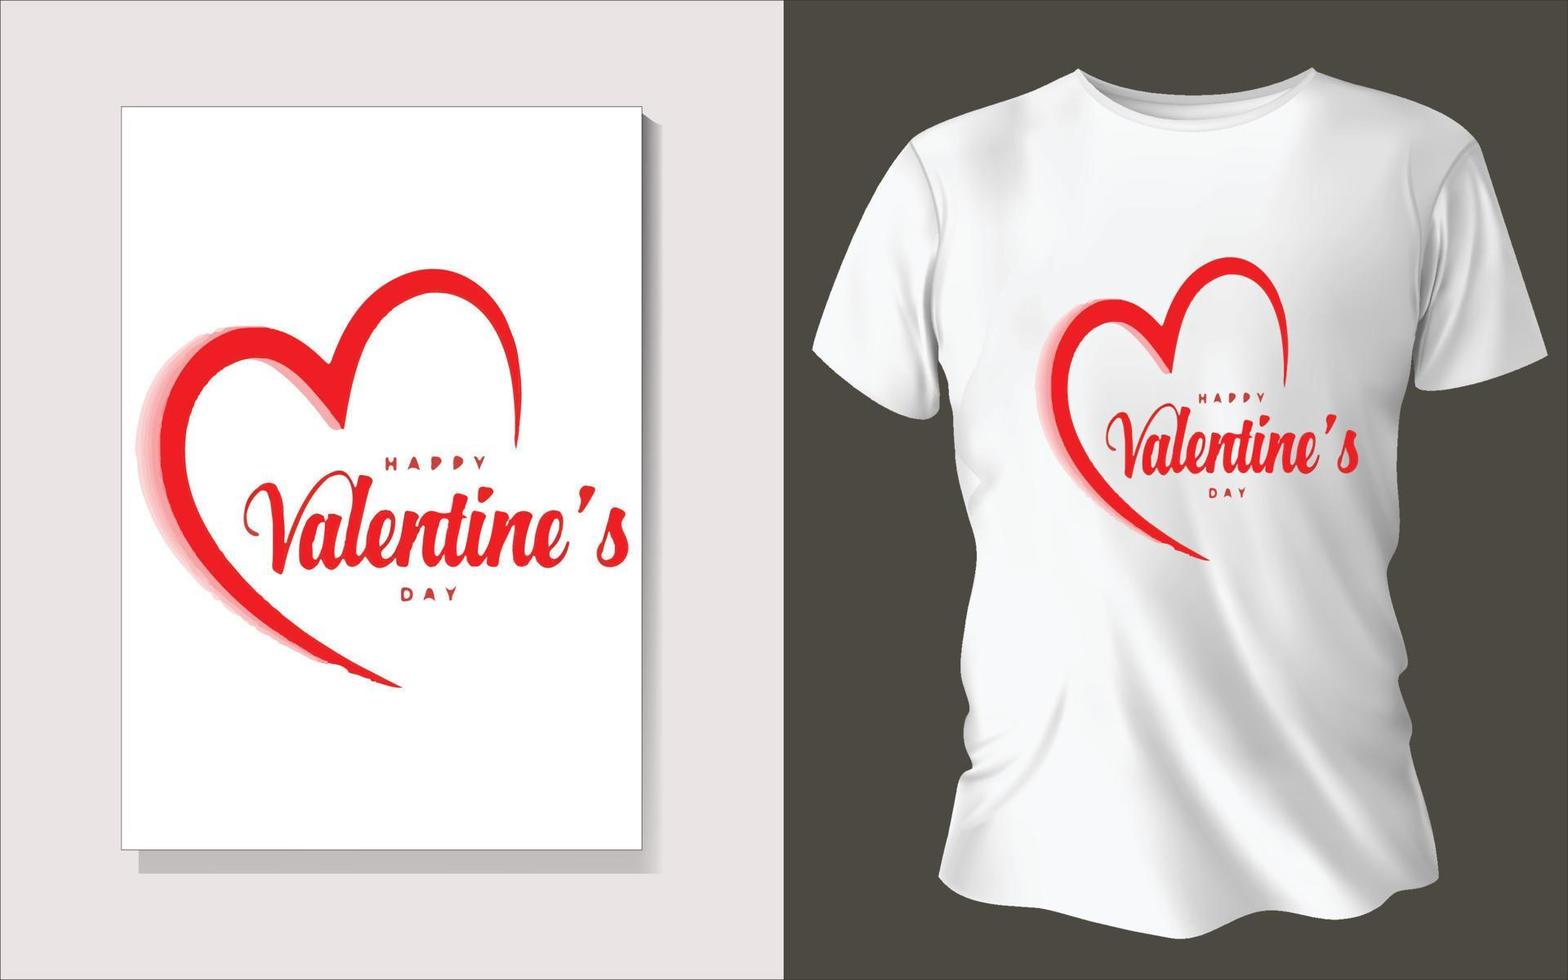 Valentines day special Tee shirt design vector